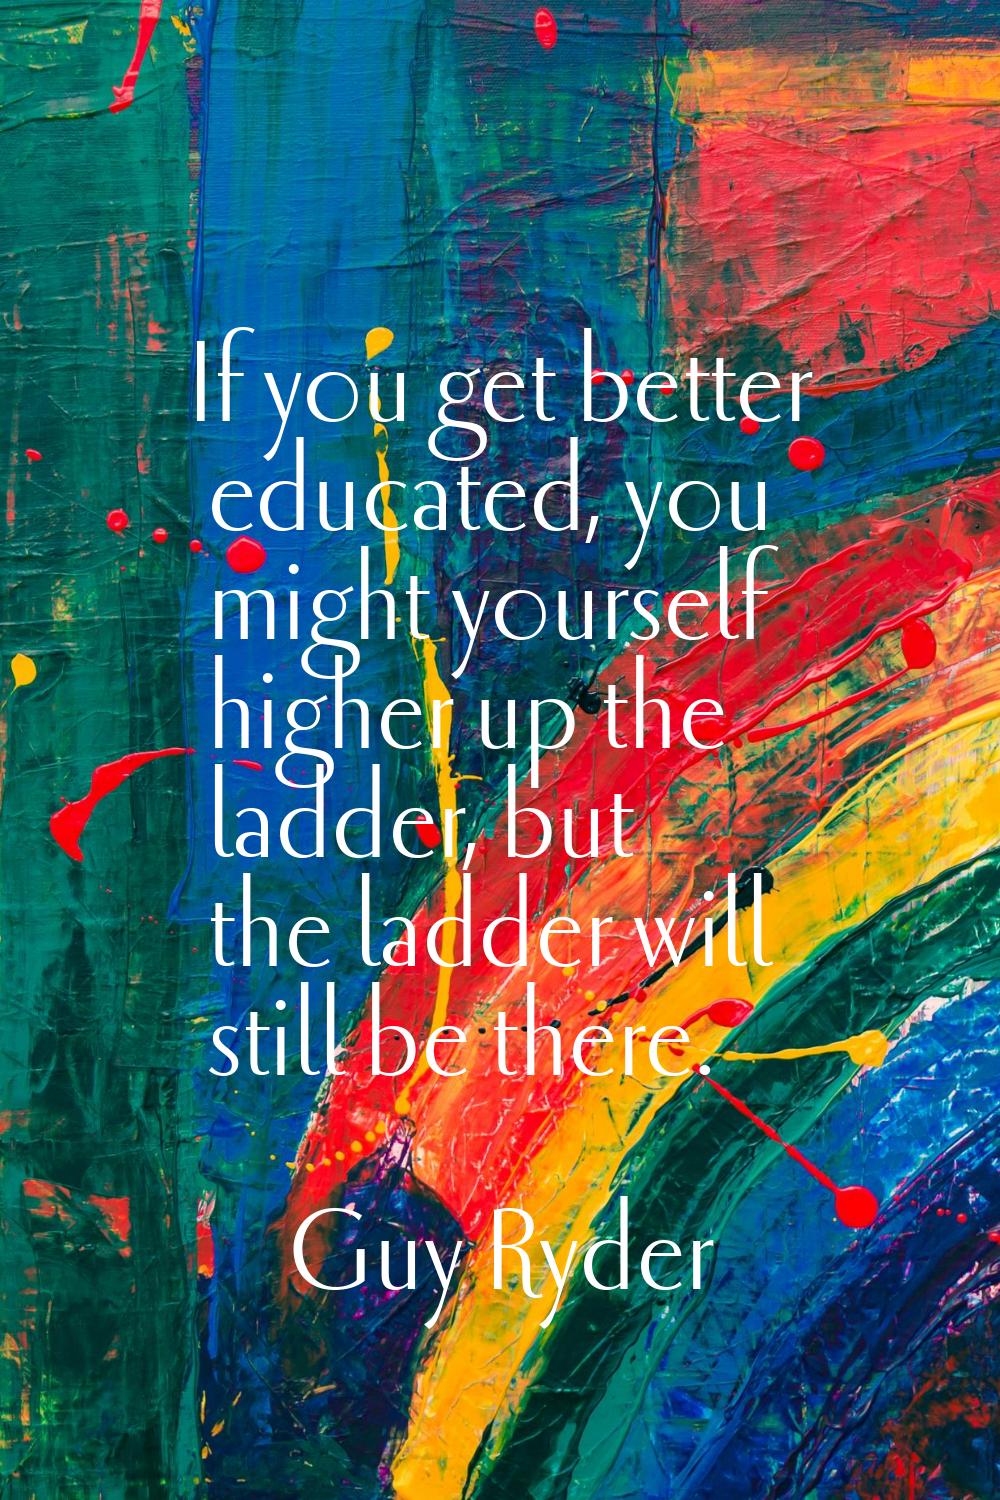 If you get better educated, you might yourself higher up the ladder, but the ladder will still be t